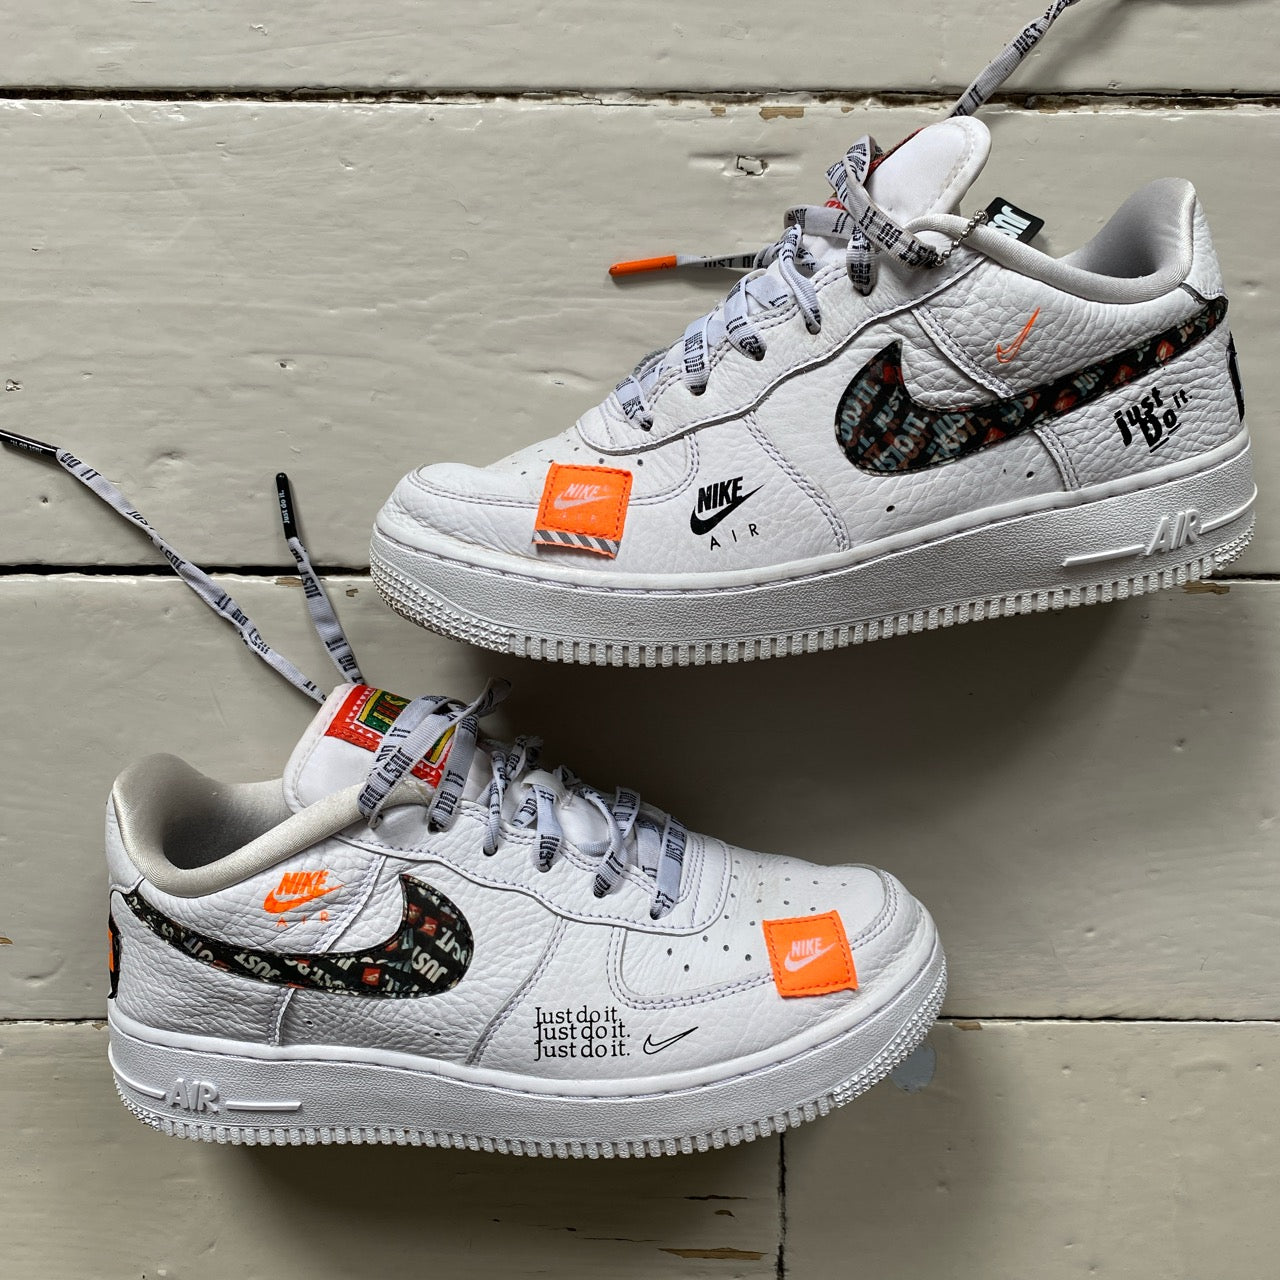 Nike Air Force 1 Just Do It Pack (UK 6)